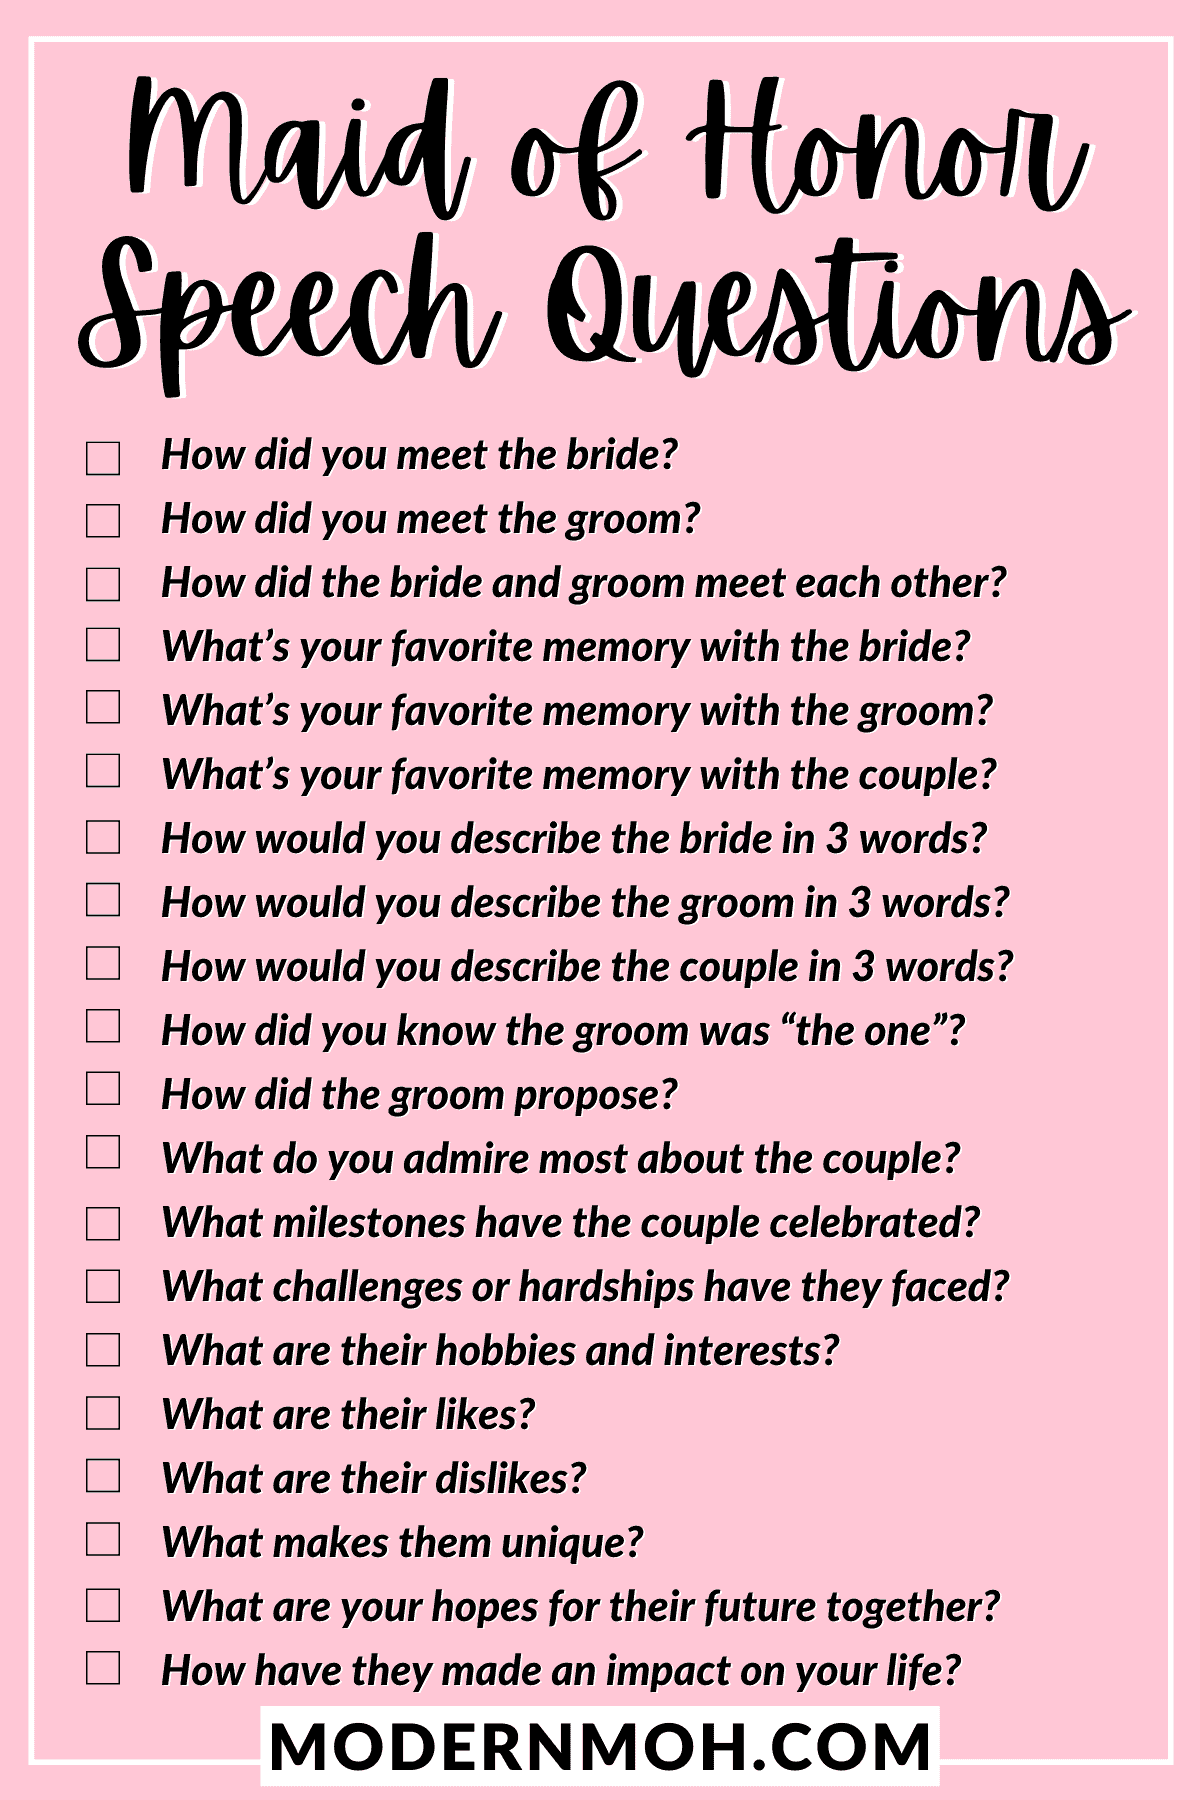 10 Questions to Help you Write Your Maid of Honor Speech  Modern MOH